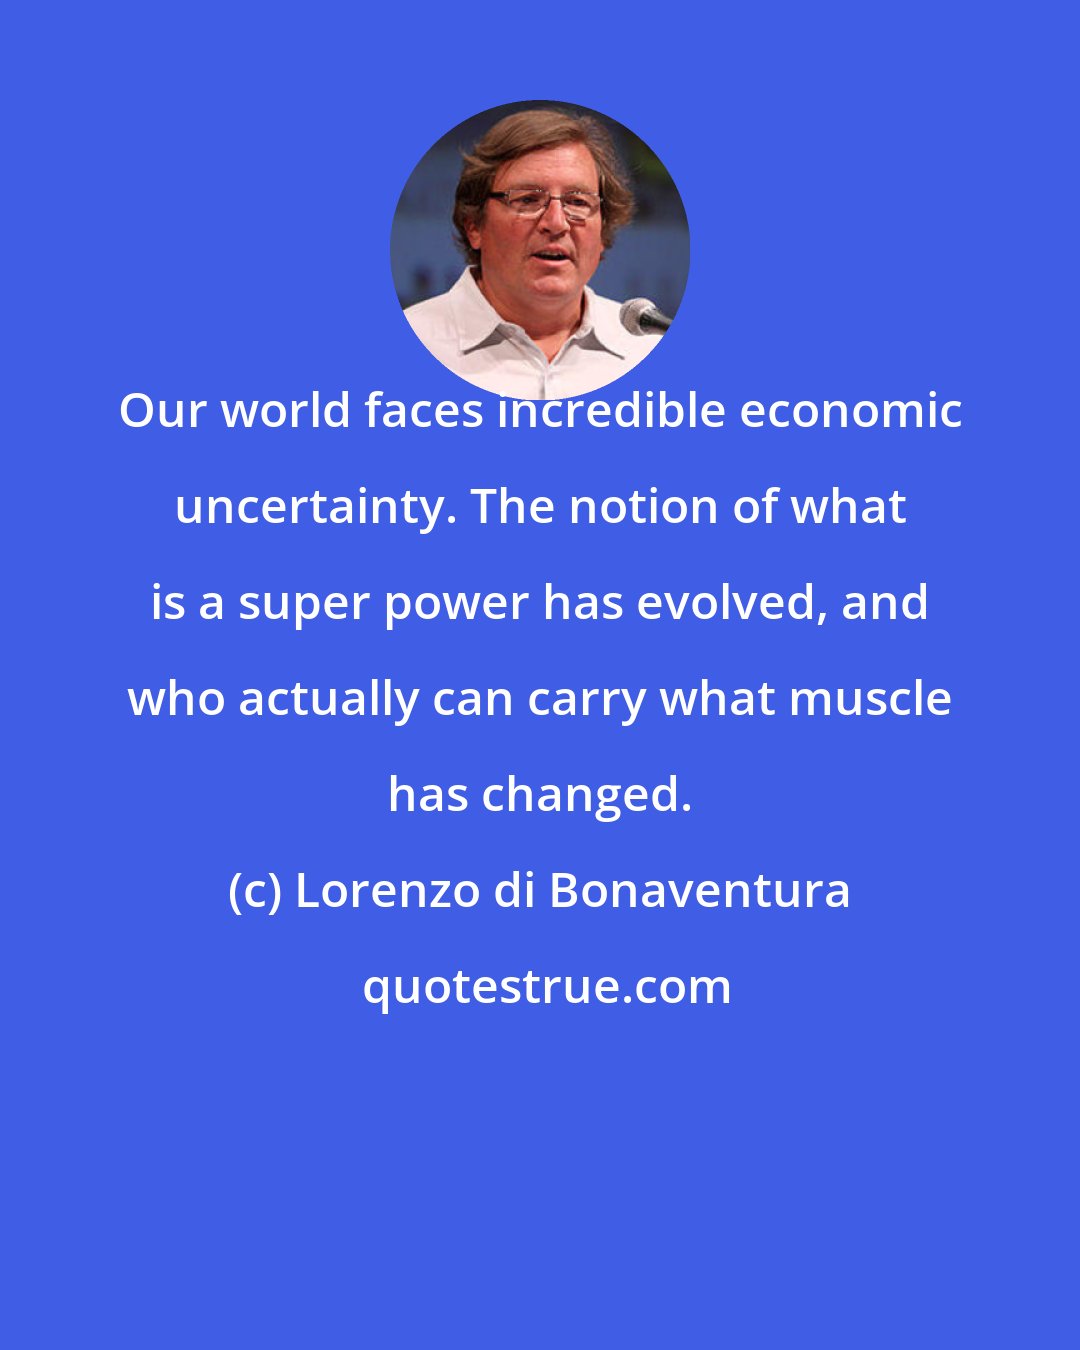 Lorenzo di Bonaventura: Our world faces incredible economic uncertainty. The notion of what is a super power has evolved, and who actually can carry what muscle has changed.